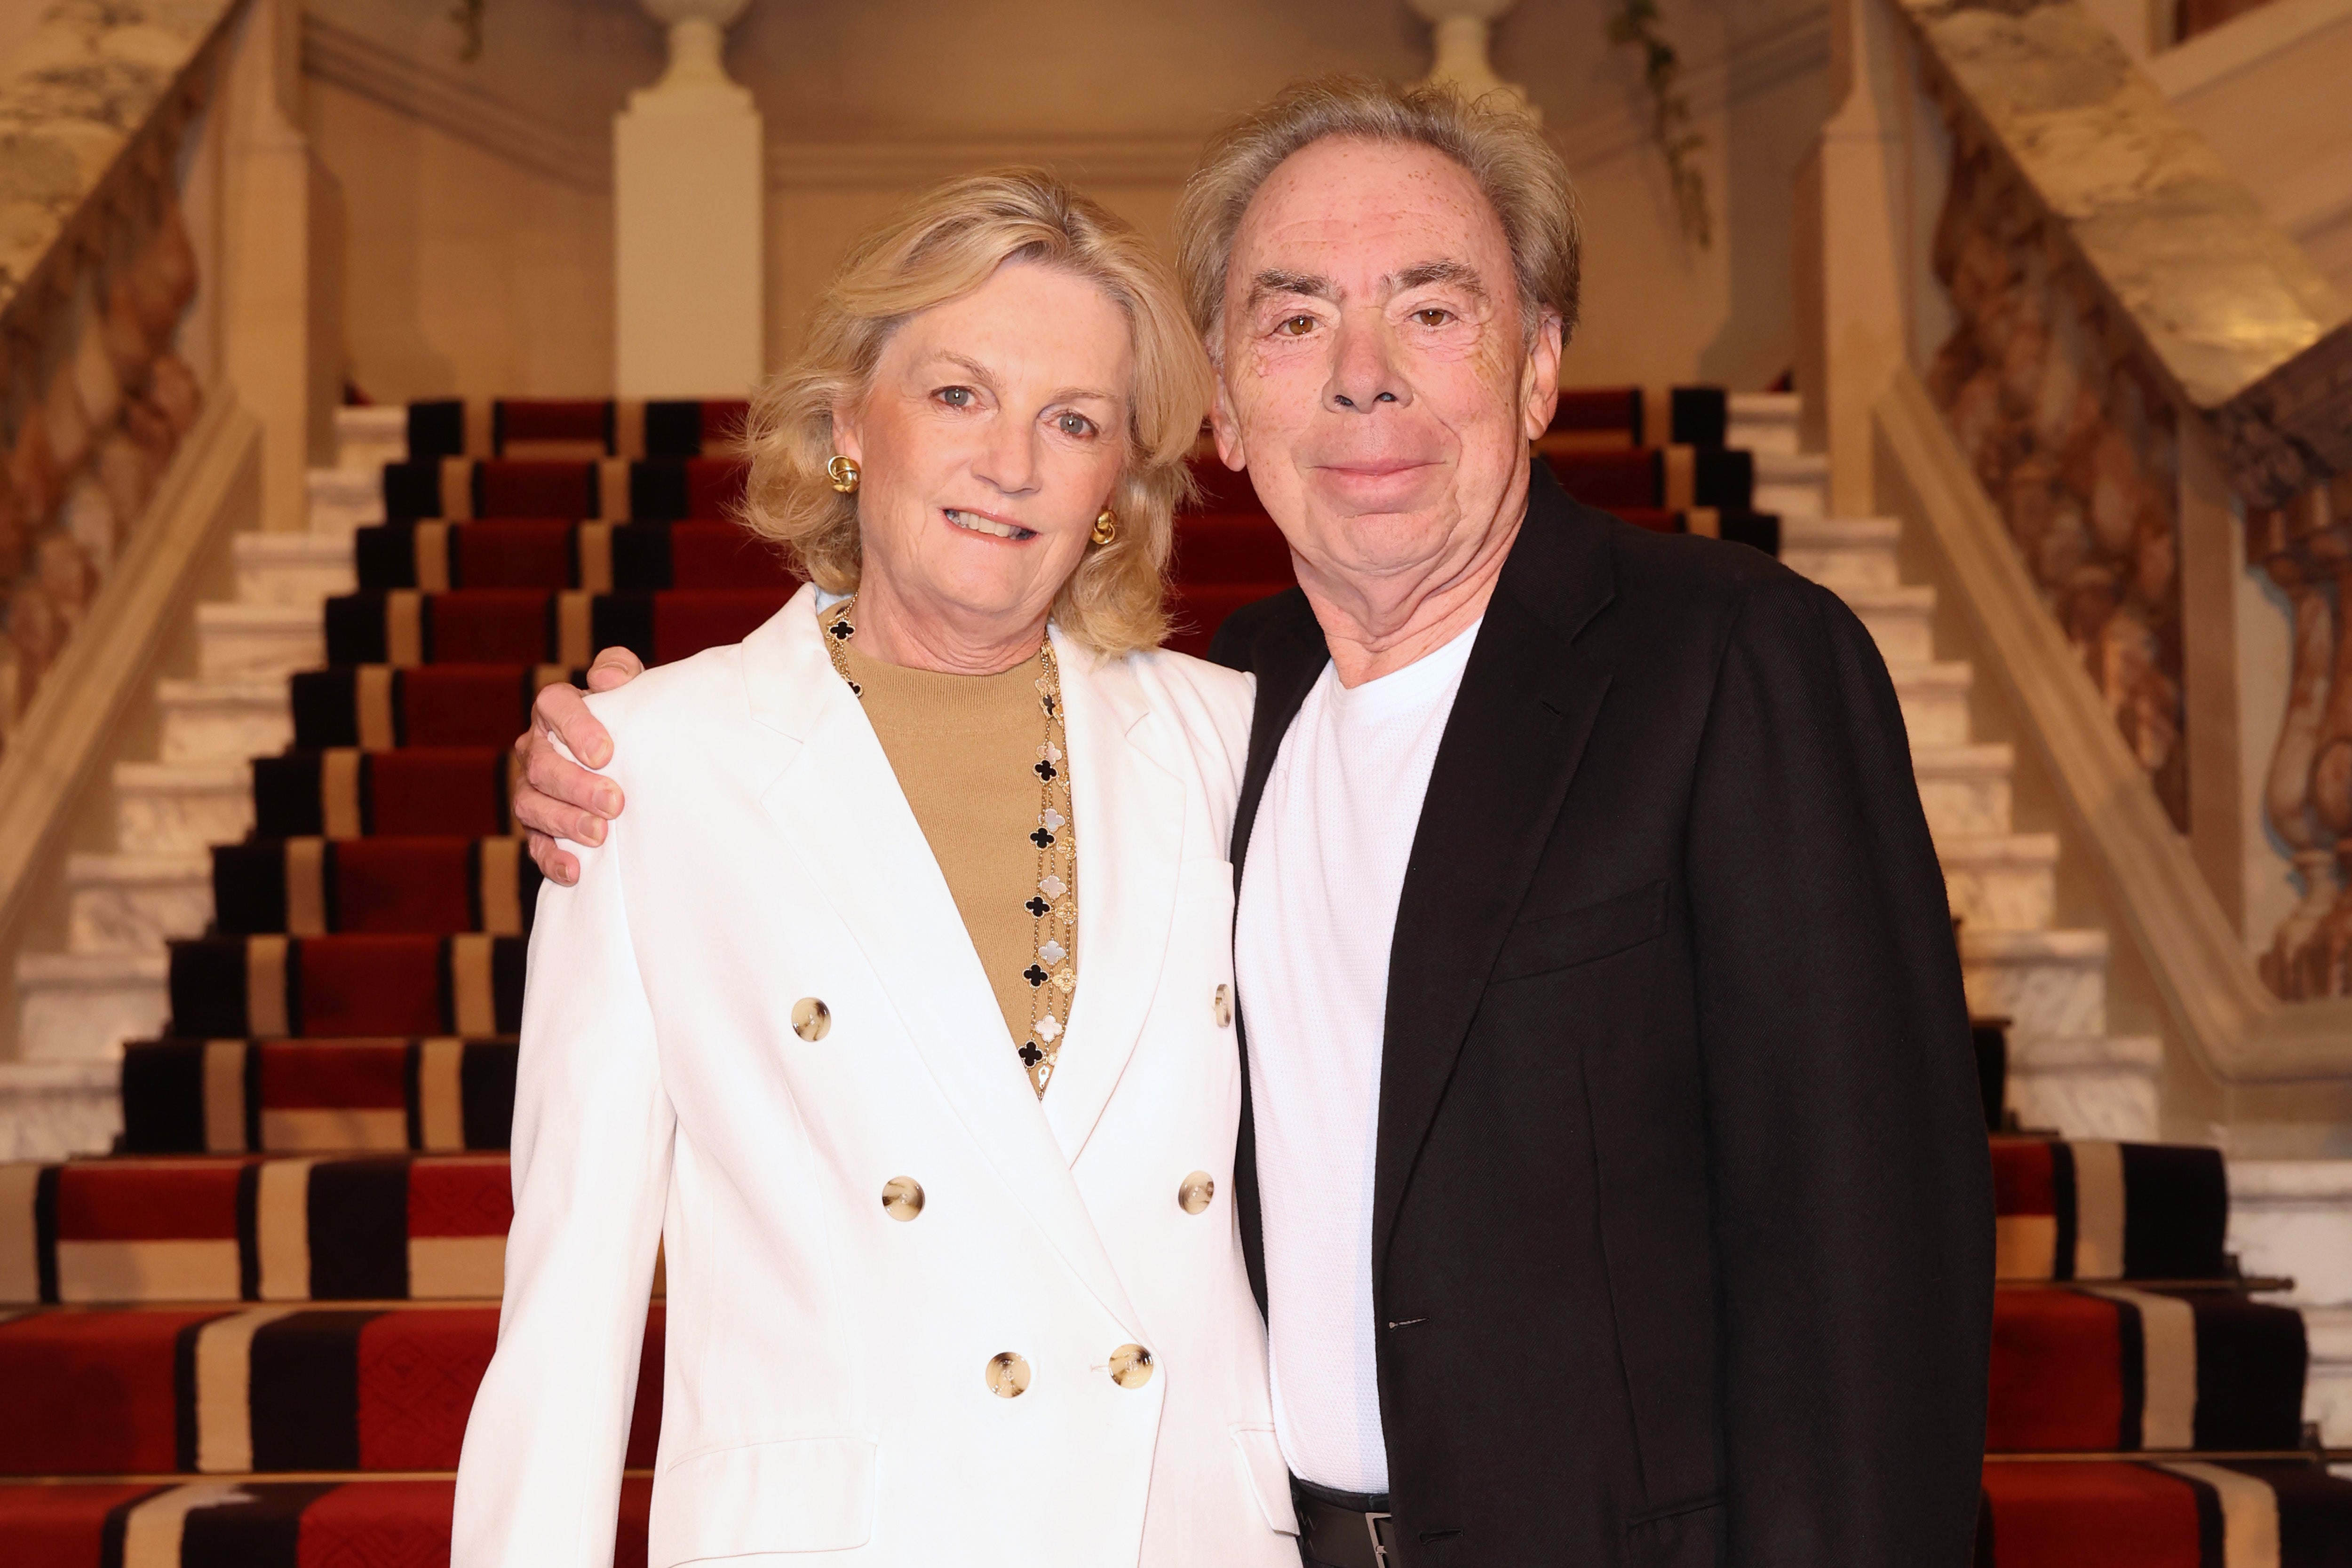 Lord Andrew Lloyd Webber and Lady Madeleine Lloyd Webber at the hotel’s opening on Tuesday